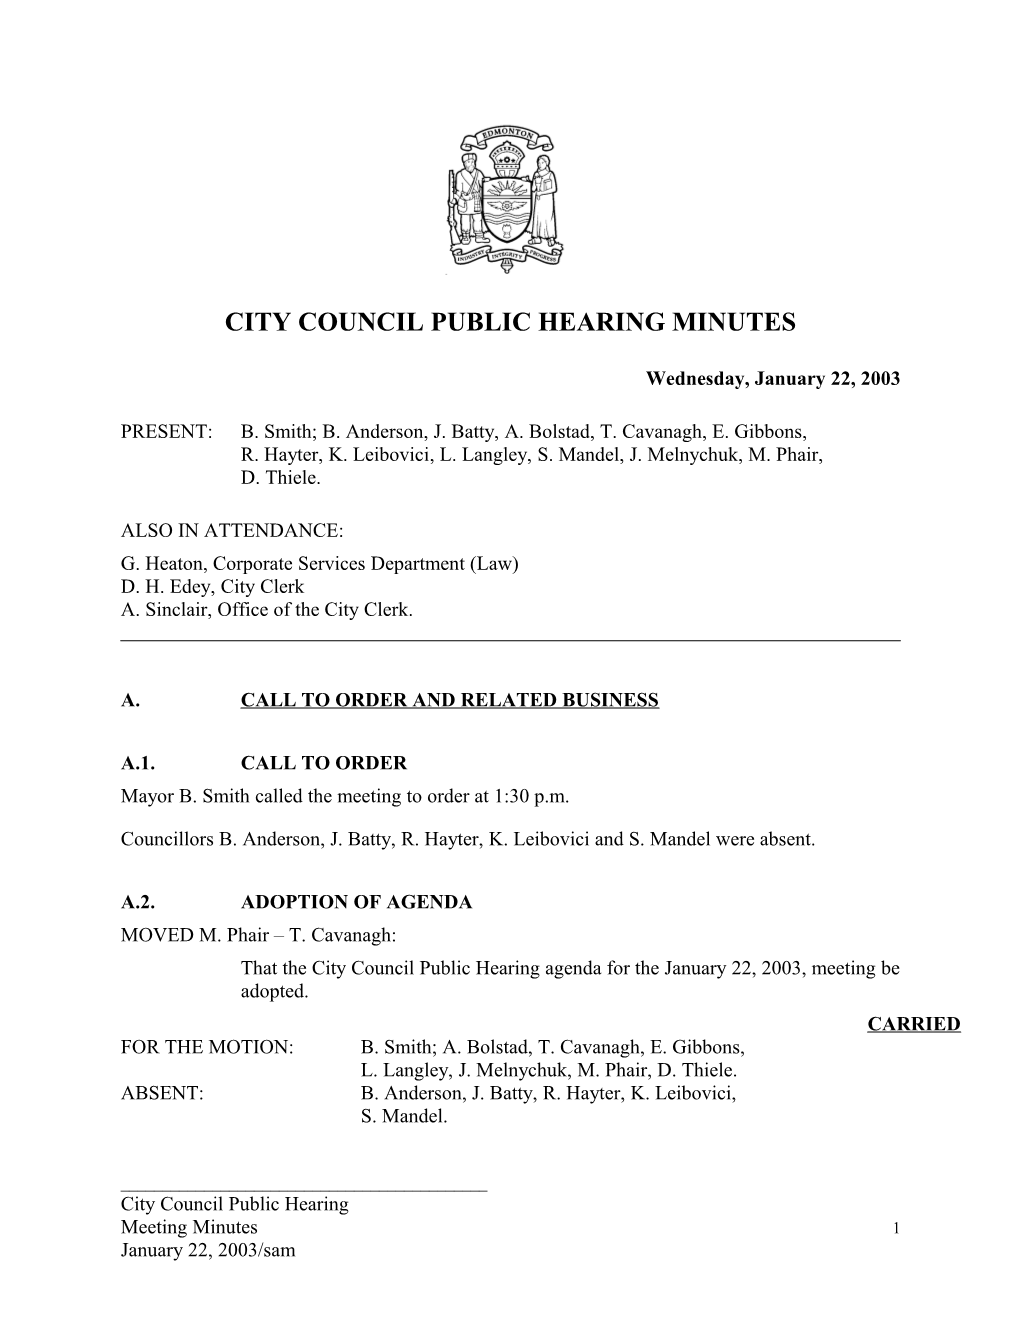 Minutes for City Council January 22, 2003 Meeting